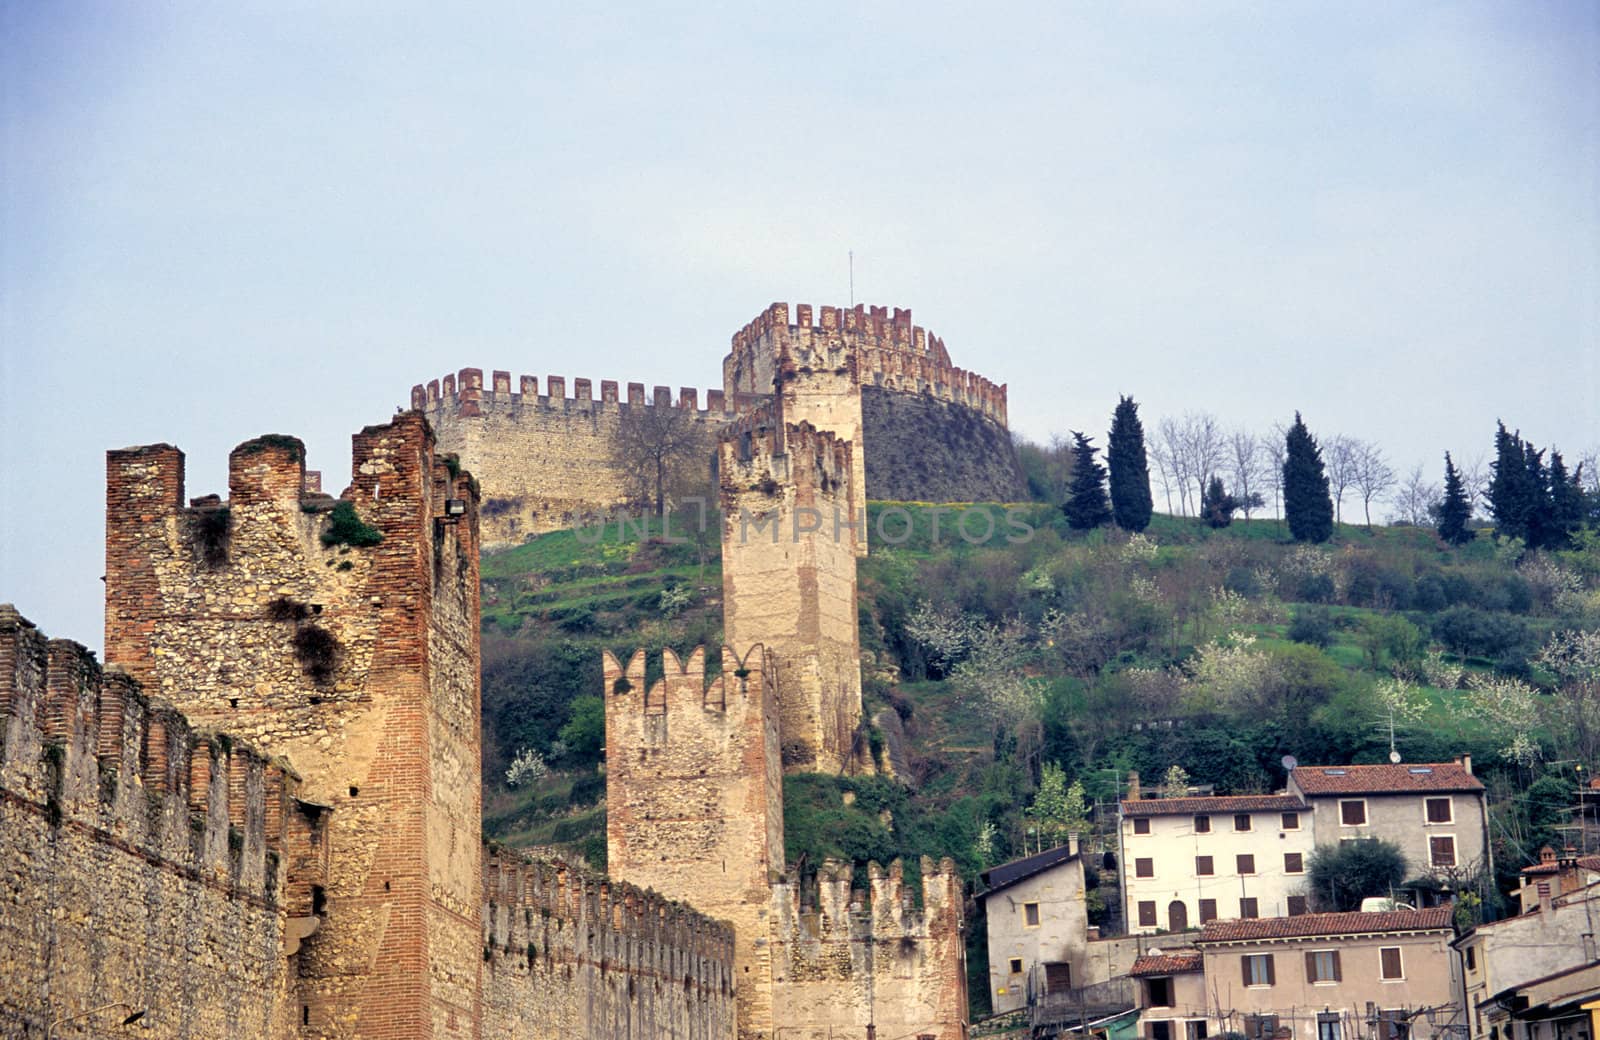 The walled city of Soave is a small comune of the Veneto region in the Province of Verona, Italy famous for its wine.